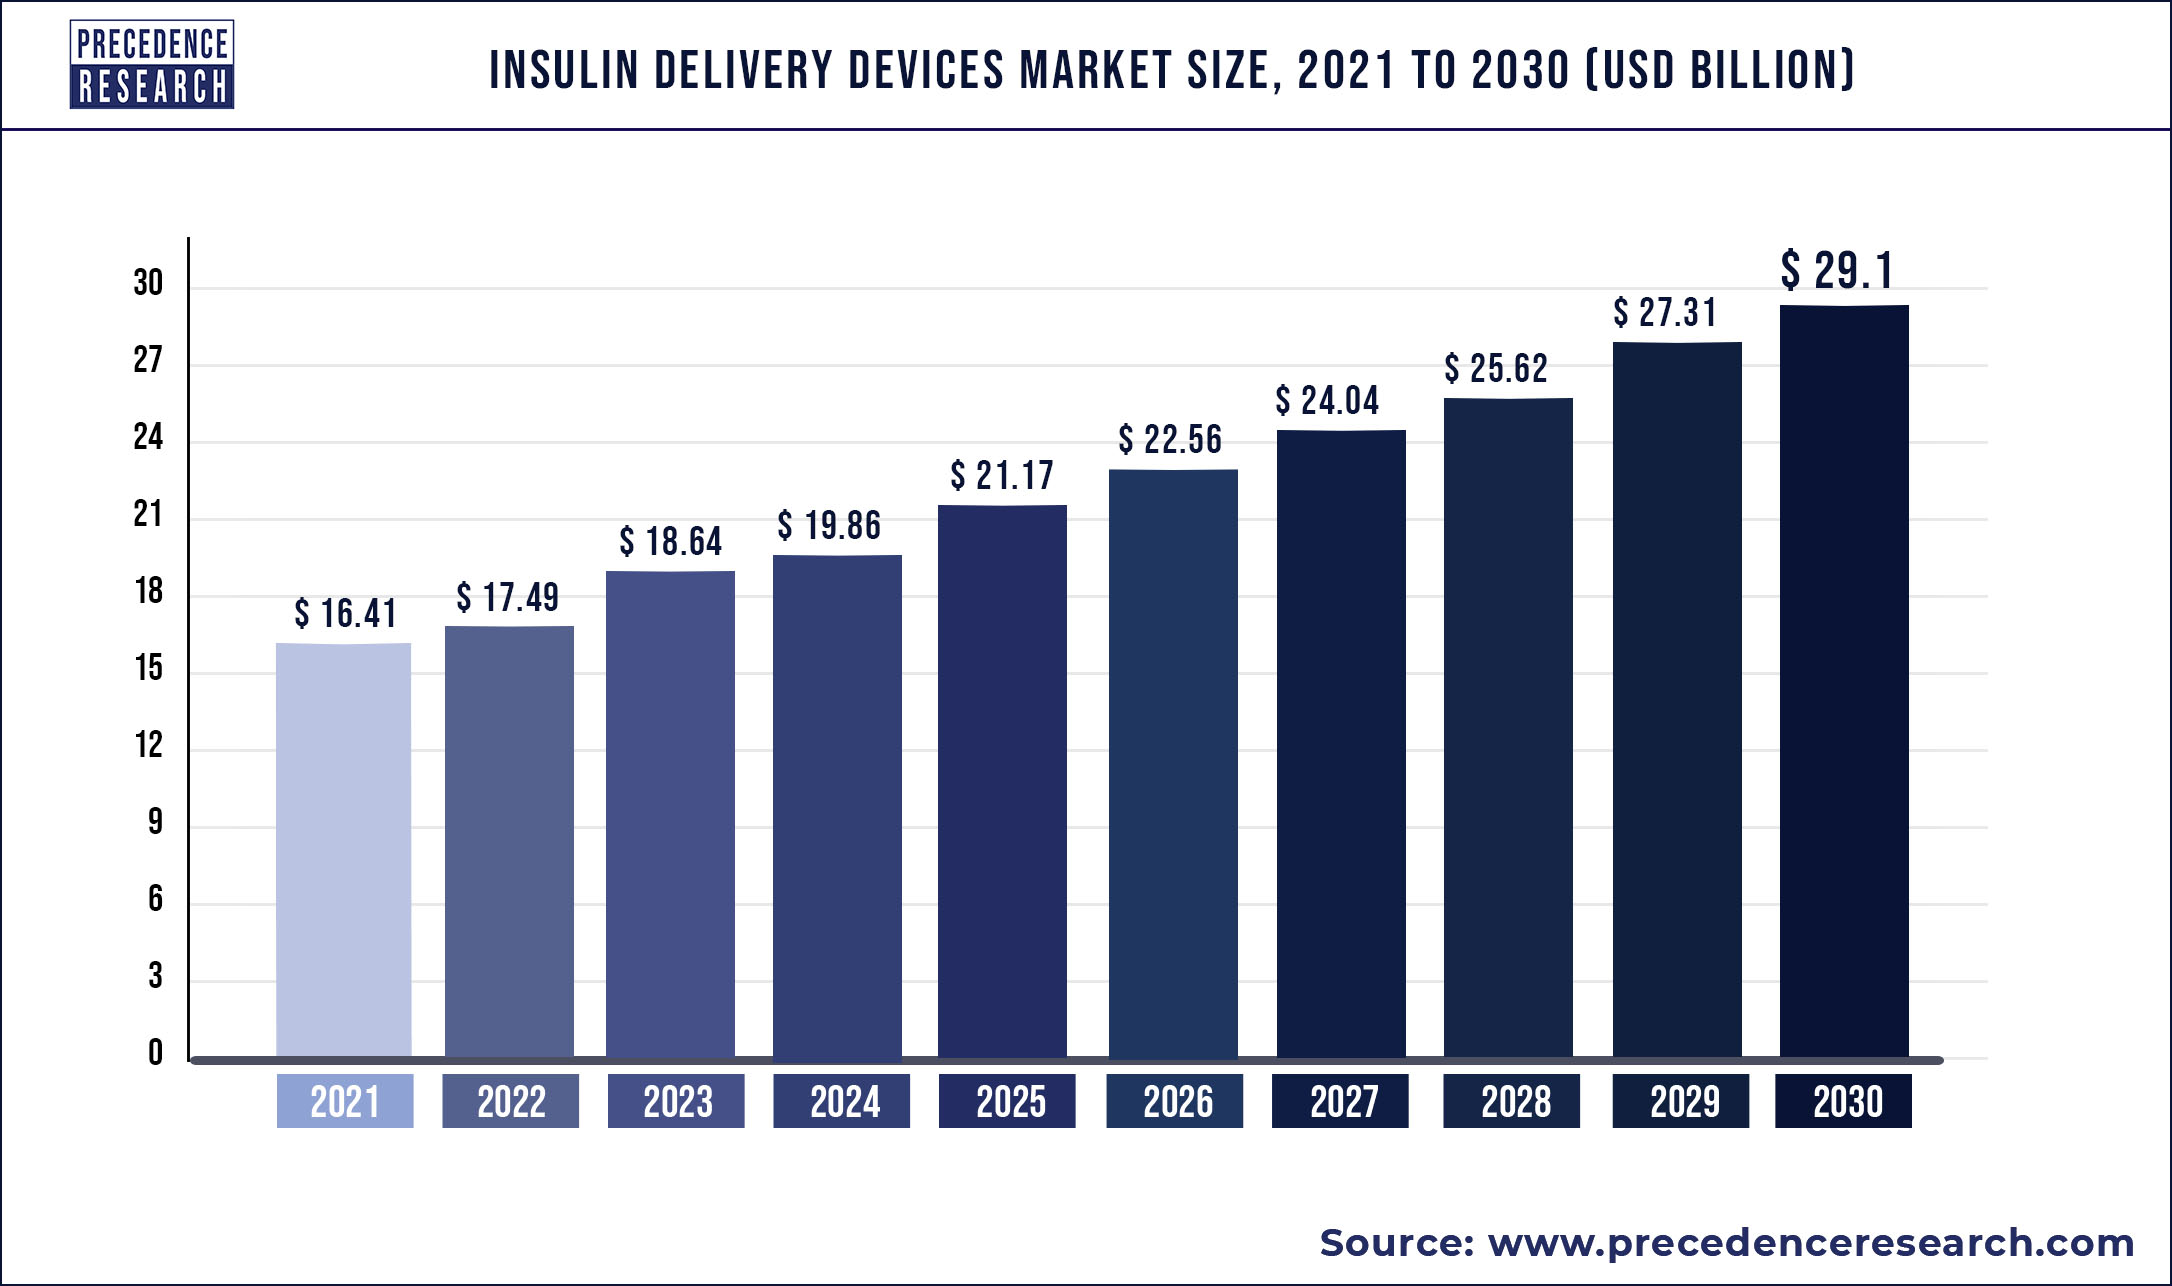 Insulin Delivery Devices